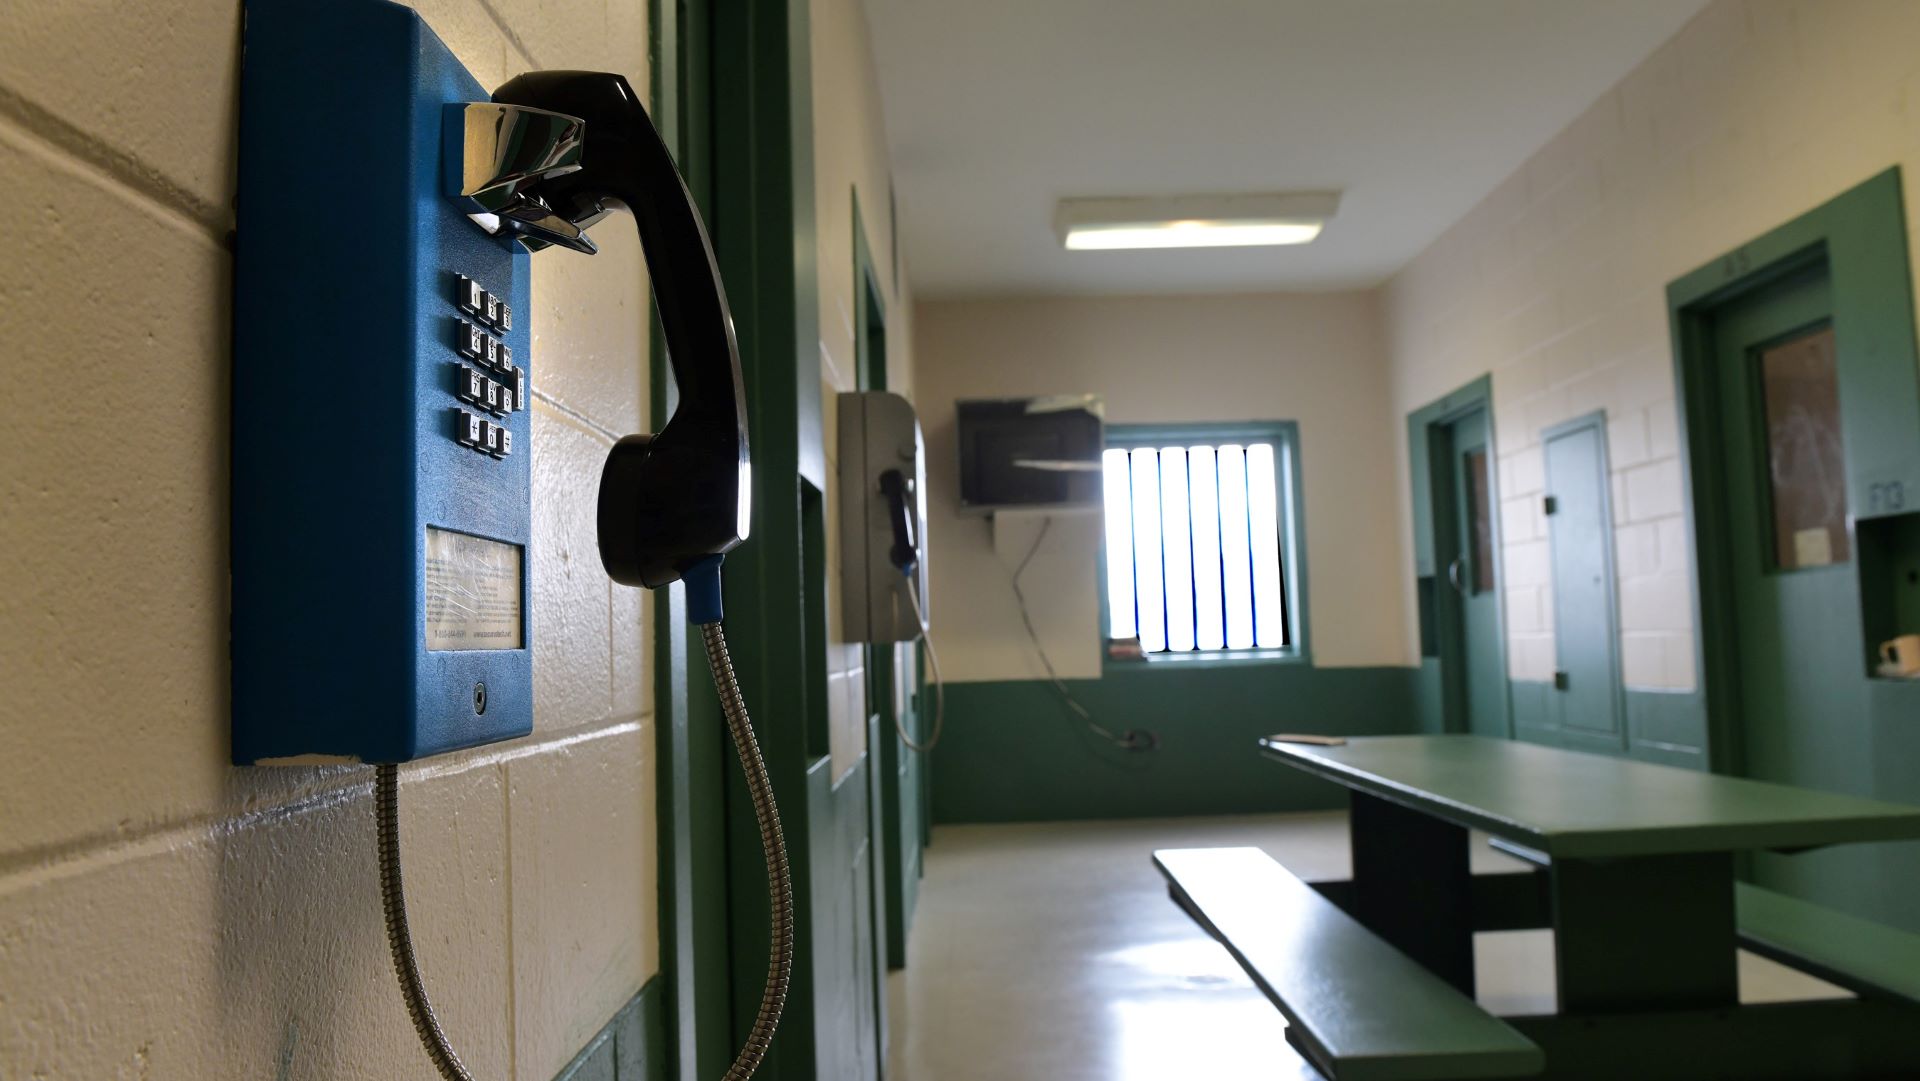 Study group recommends stricter policies about access to prisoner phone calls